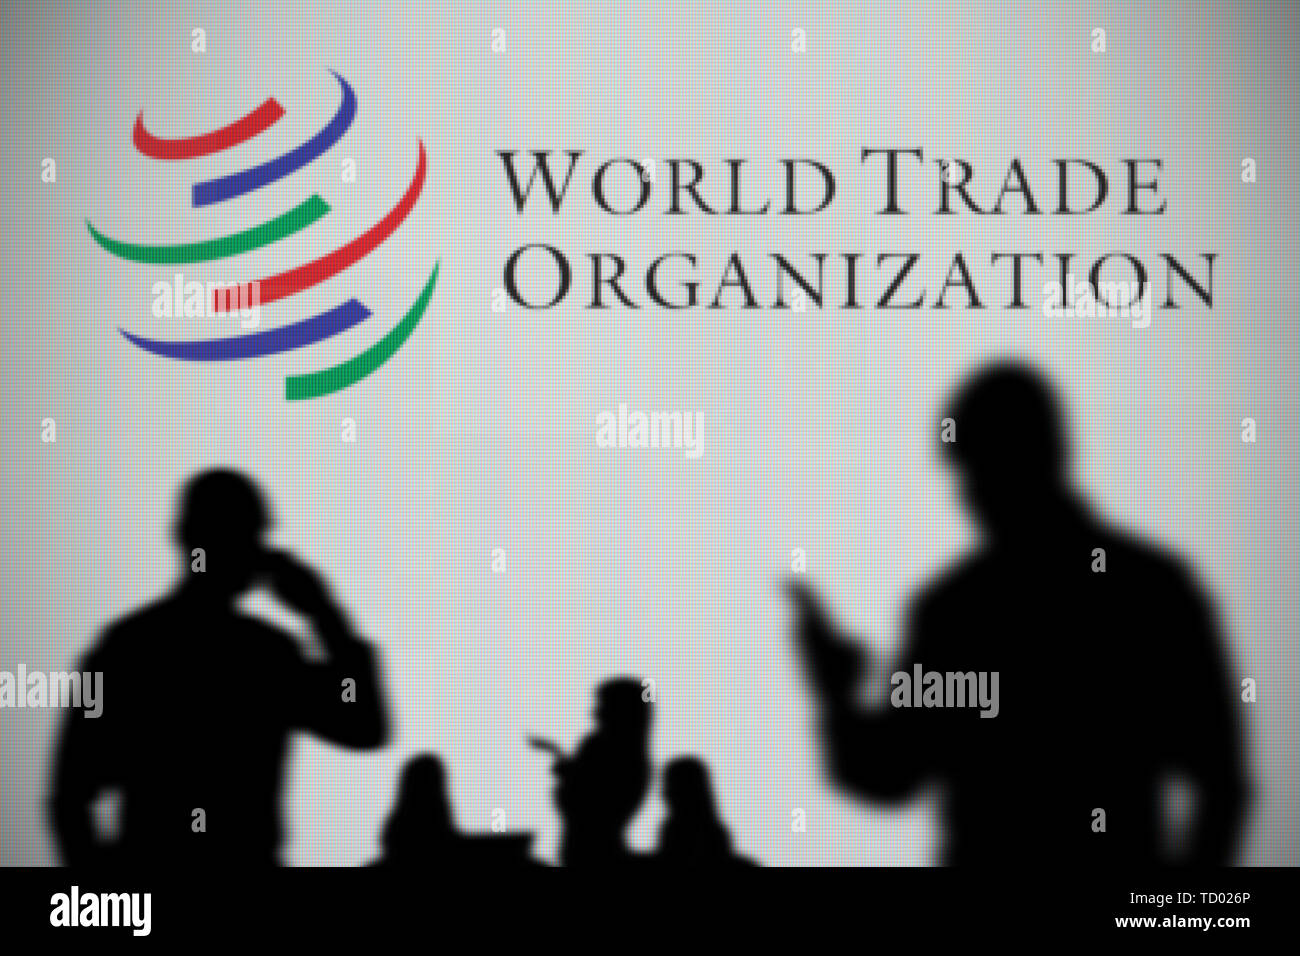 The World Trade Organization logo is seen on an LED screen in the while a silhouetted person uses a smartphone in the foreground (Editorial use only) Stock Photo